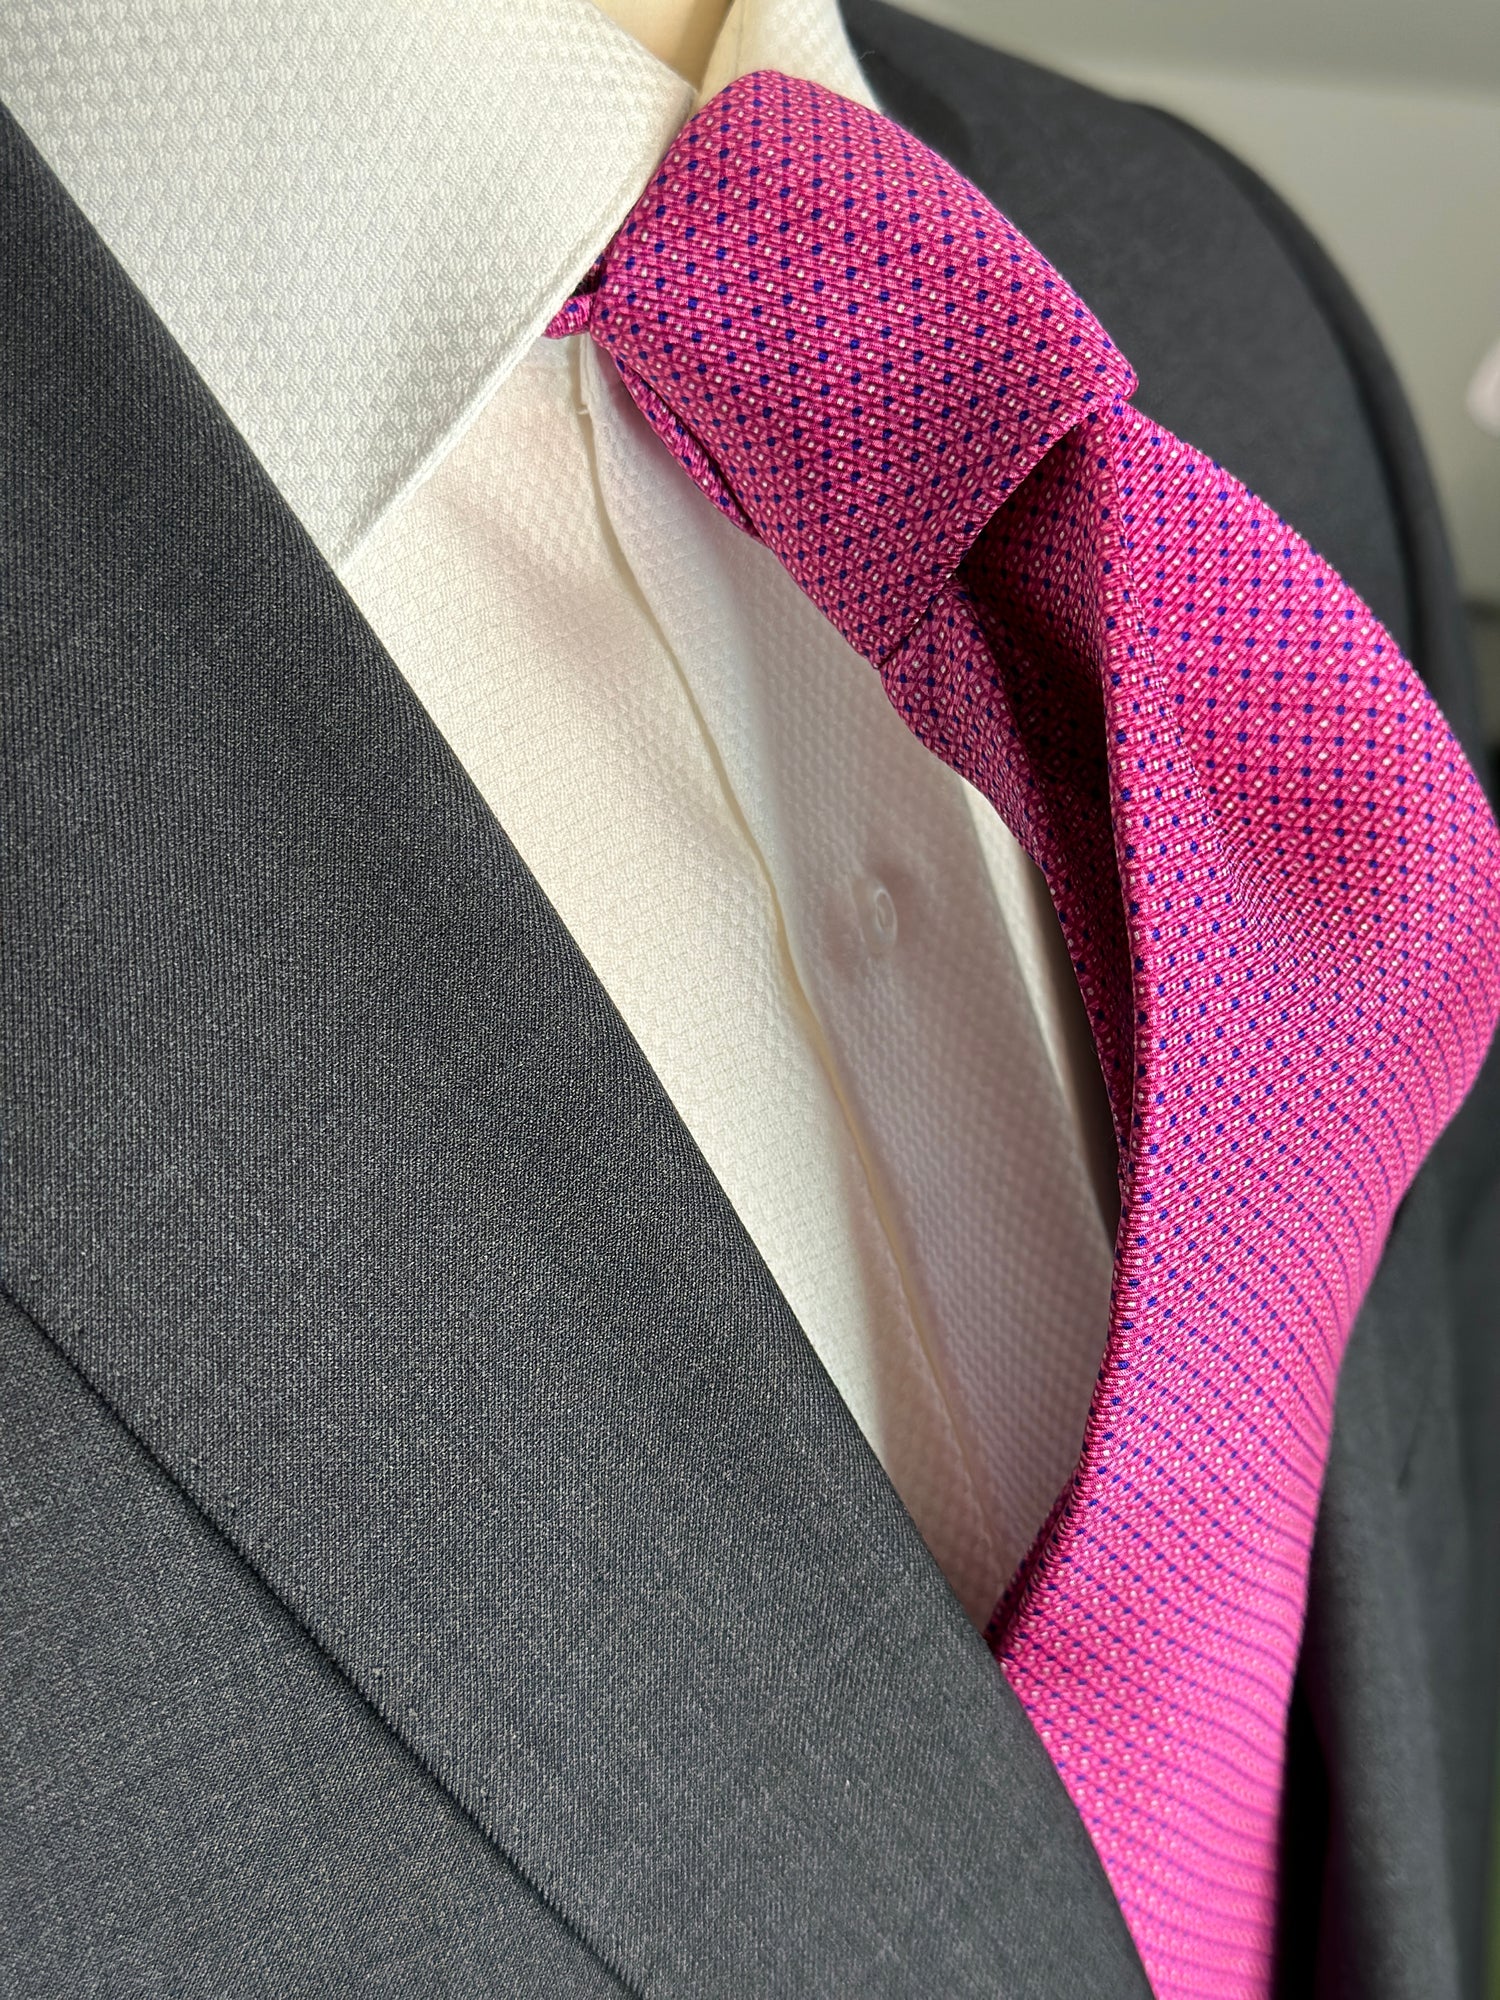 100% silk twill is a luxurious and rich silk. Smooth to the touch with a lightweight soft feel, this tie makes a striking statement in bright pink. It does, however, become toned down due to its very neat and small mini dot geometric pattern. Great for everyday business or law this tie goes out day and night.